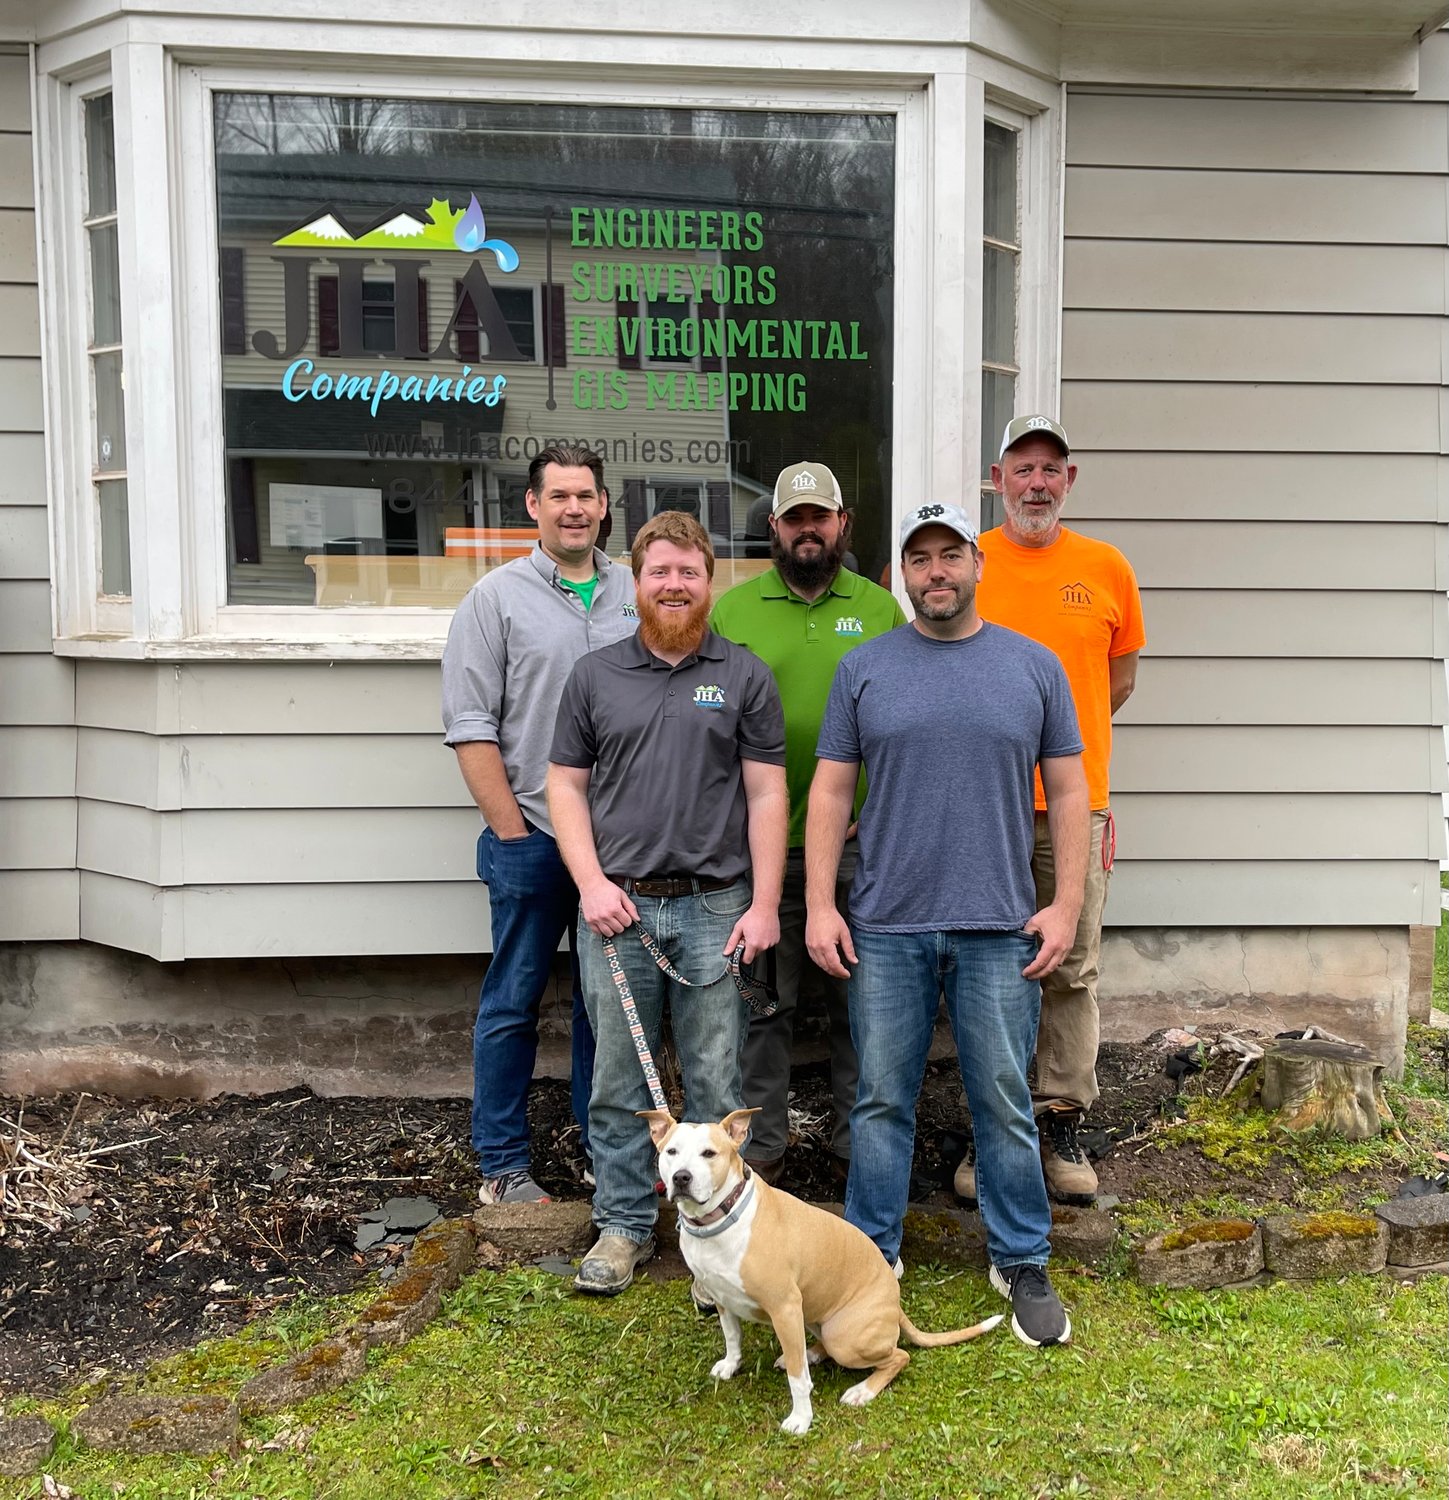 JHA Companies staff, back row, from left: Christopher Oleniacz, Rich Arnot and Matt Weaver. Front row, Nikolas Decker, Christopher Thomas and Ginger the dog.